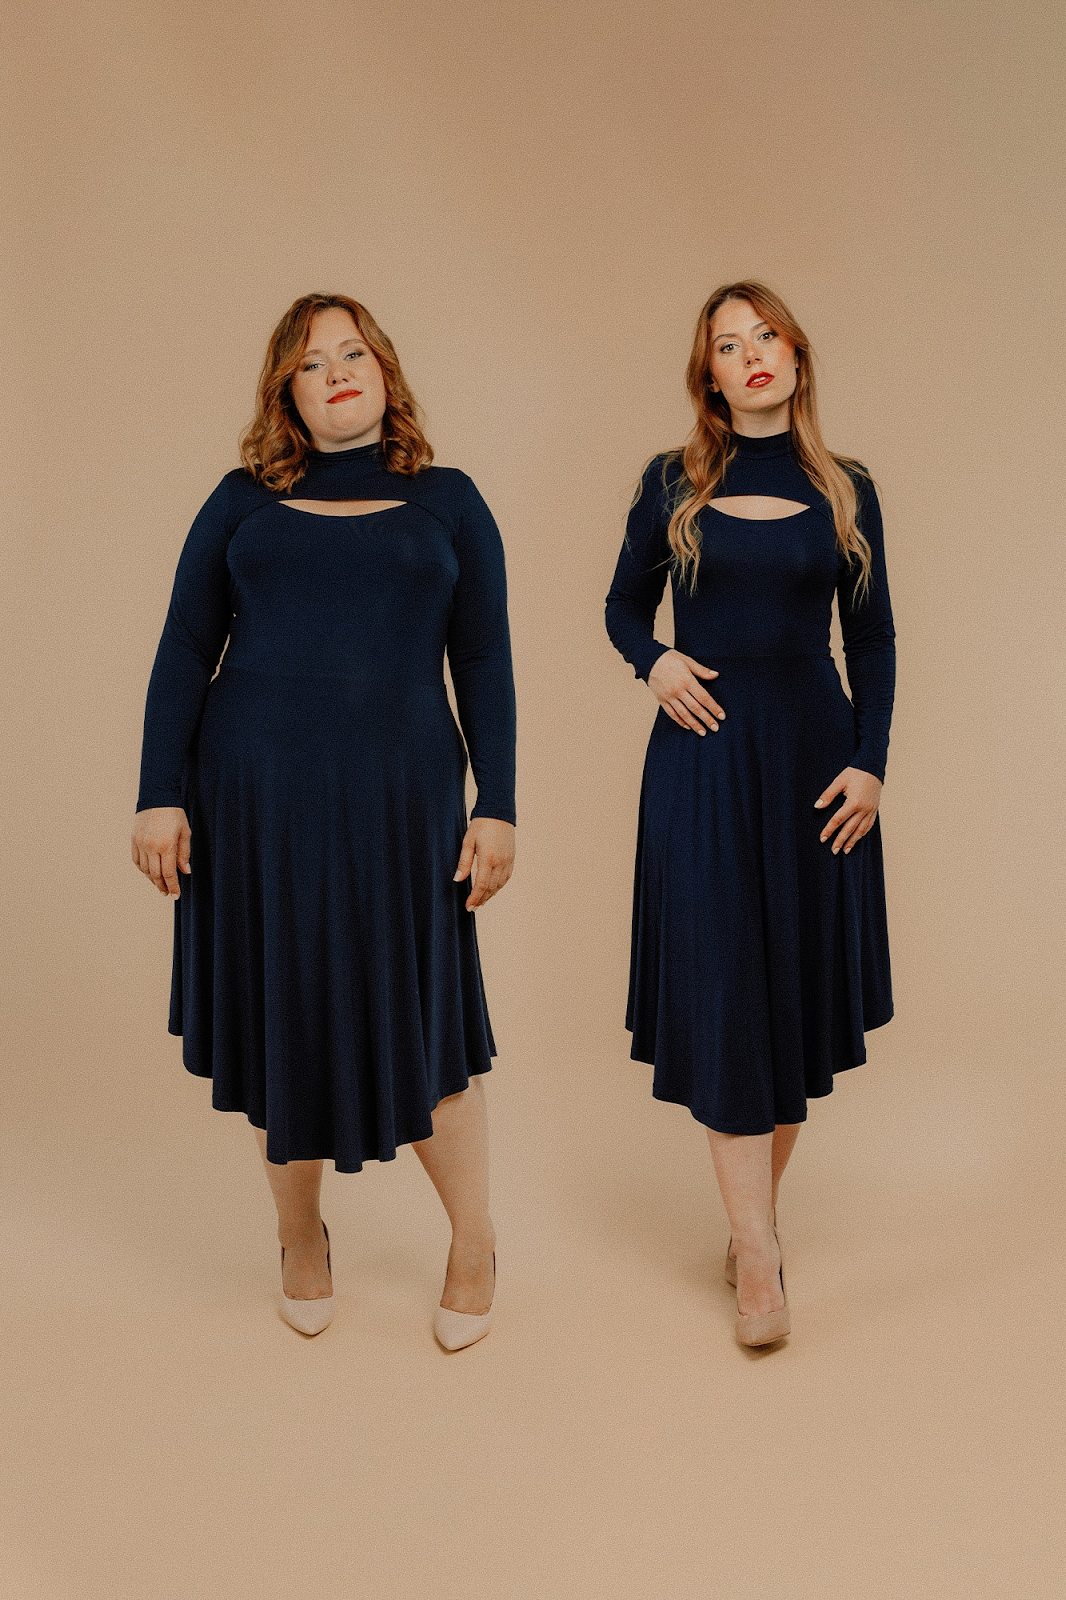 A photo of two models side by side.  The left model is plus sized, the right model is a medium build.  Both are fair skinned with red hair that is long.  The dress they are wearing is navy with a skirt that is longer at the center front than at the sides.  It has sliver of skin exposed at the high chest.  The long sleeves are close fitting.